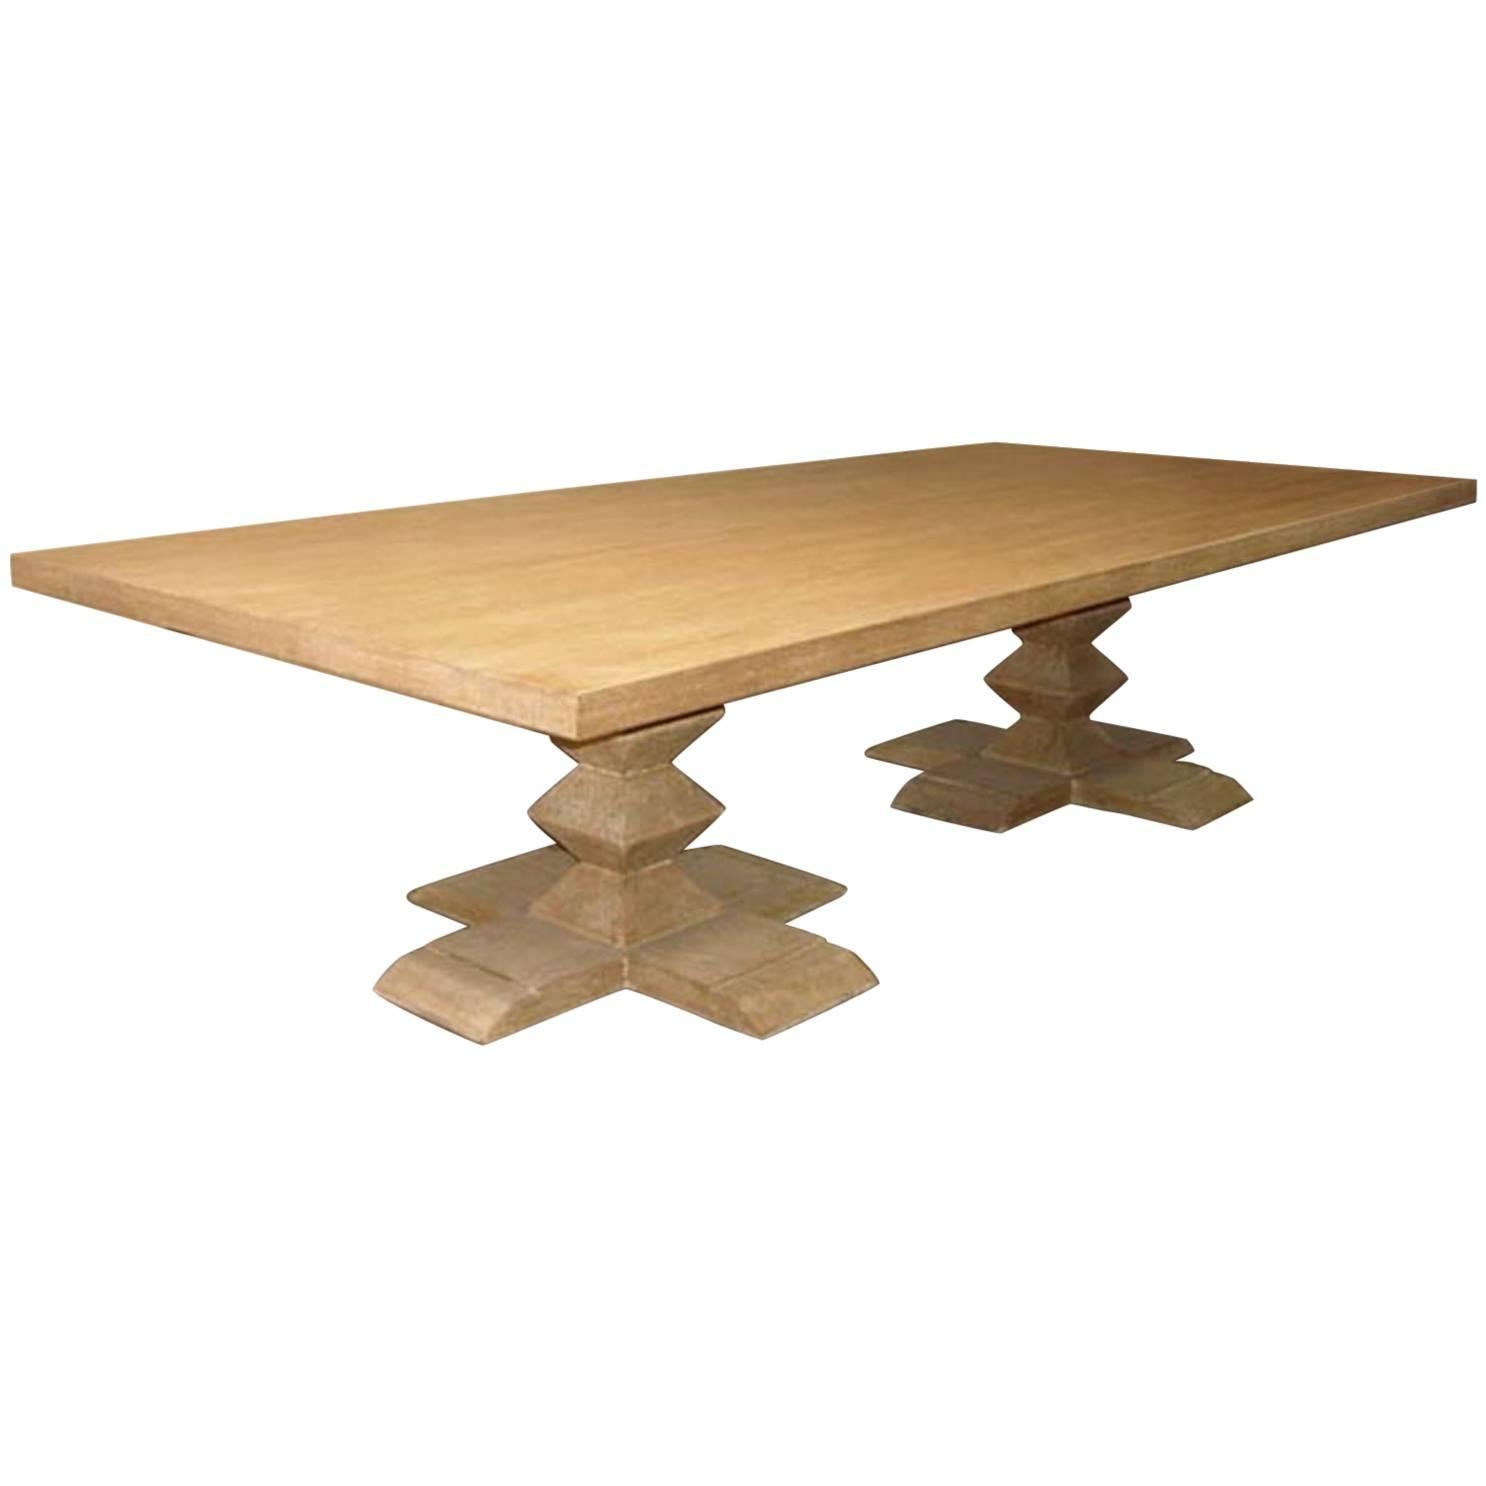 Custom Table With Two Pyramid Pedestals in Cerused Oak by Dos Gallos Studio